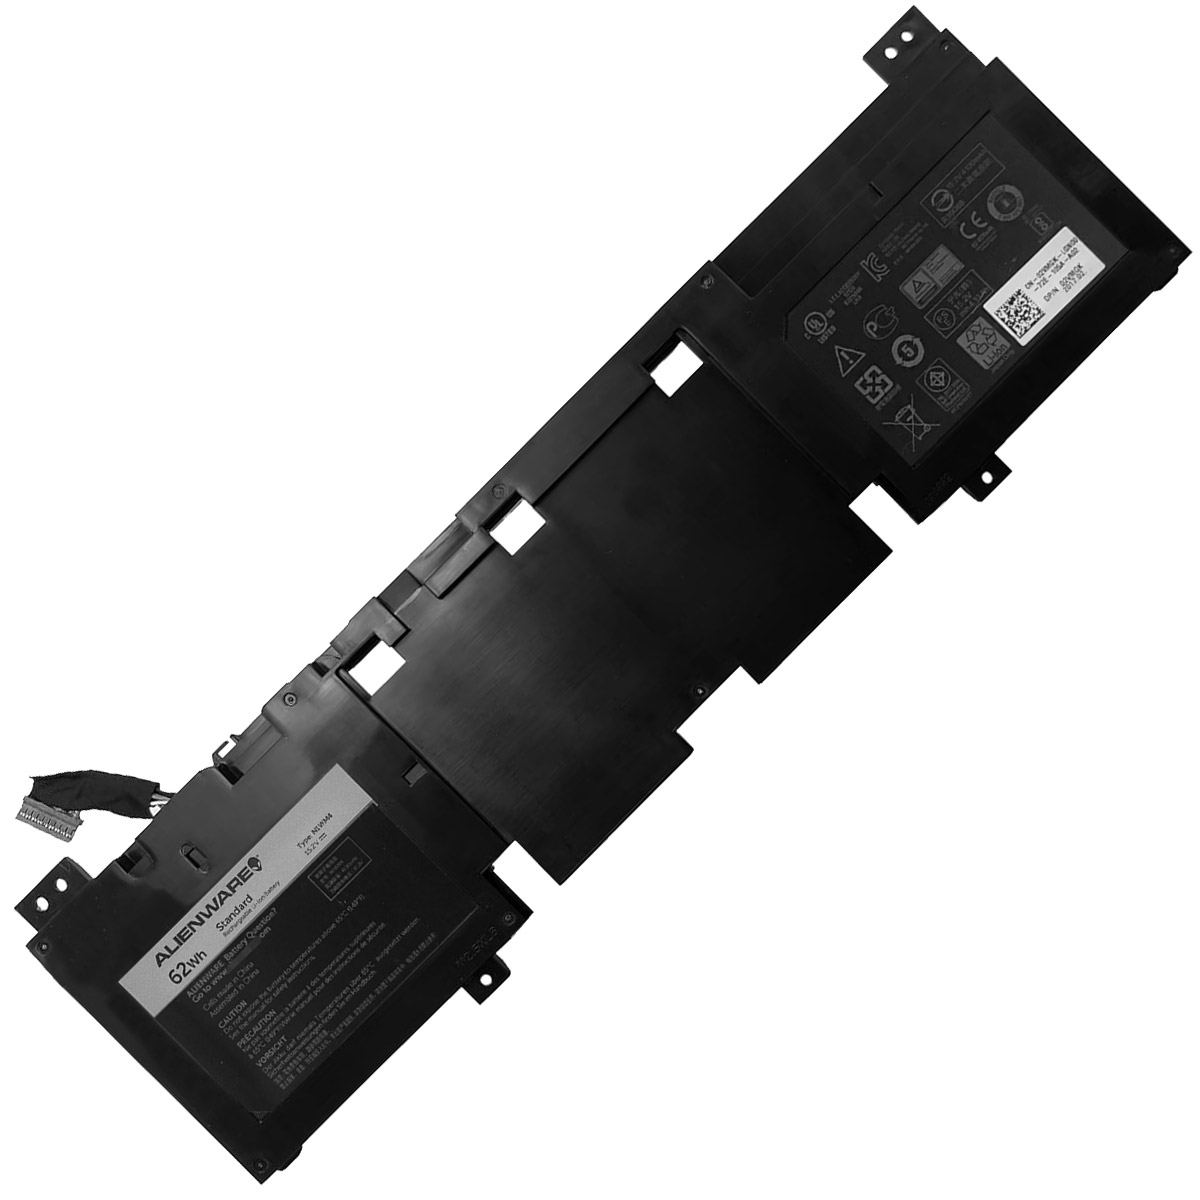 DELL-Alienware 13 R2/N1WM4-Laptop Replacement Battery